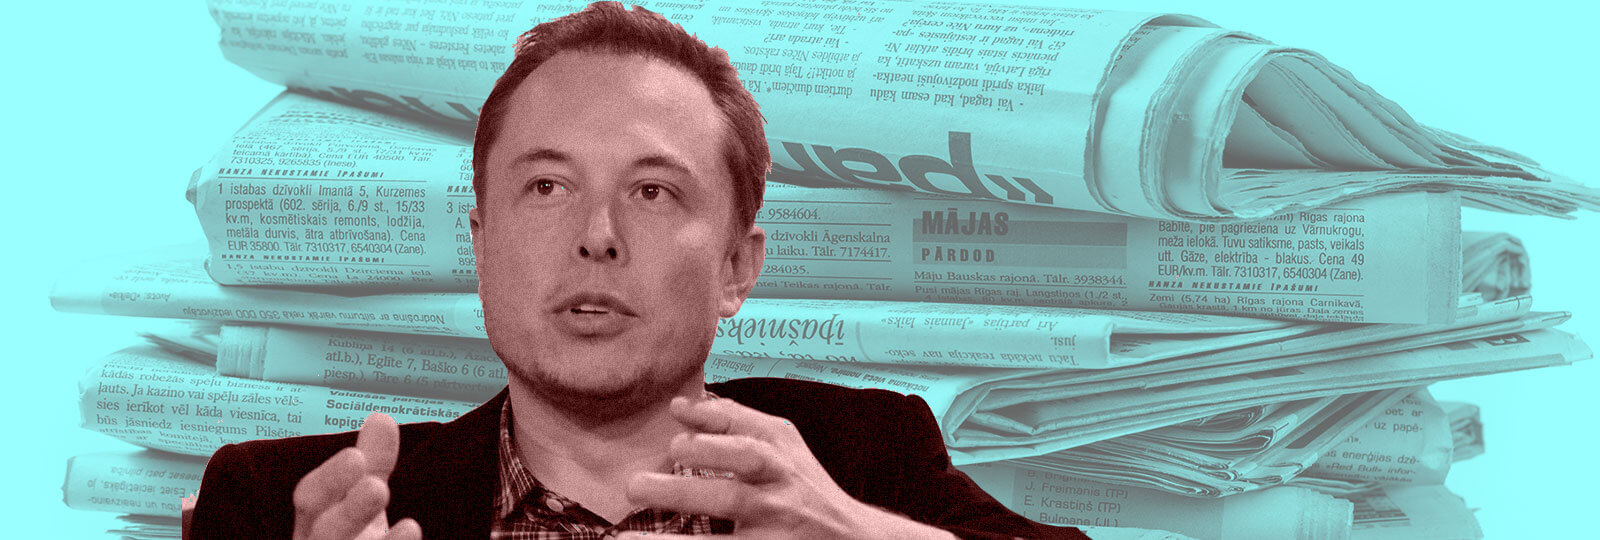 A photo of Elon Musk in front of a stack of newspapers.